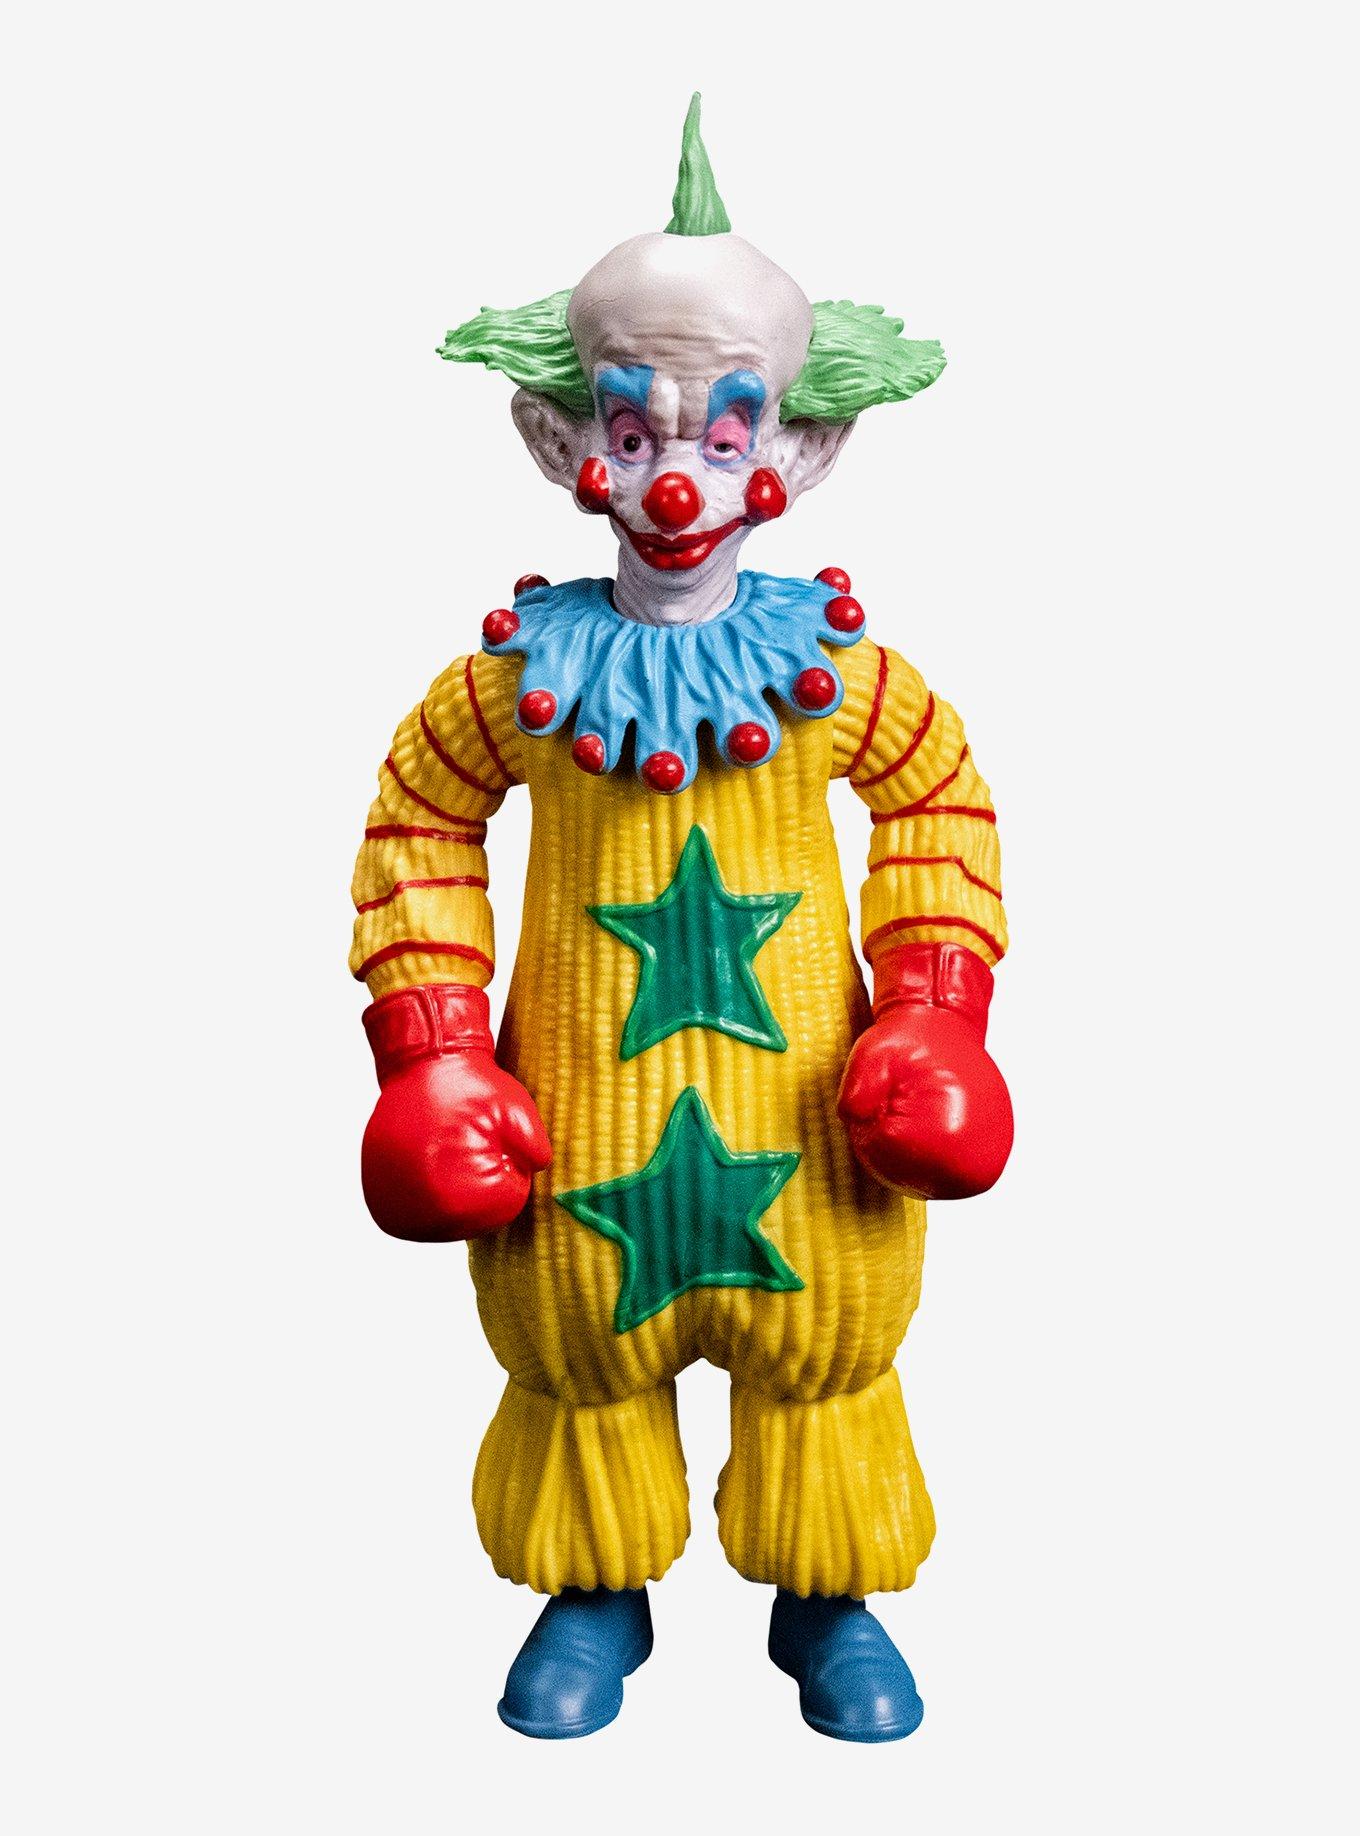 Scream Greats Killer Clowns From Outer Space Shorty Figure, , hi-res